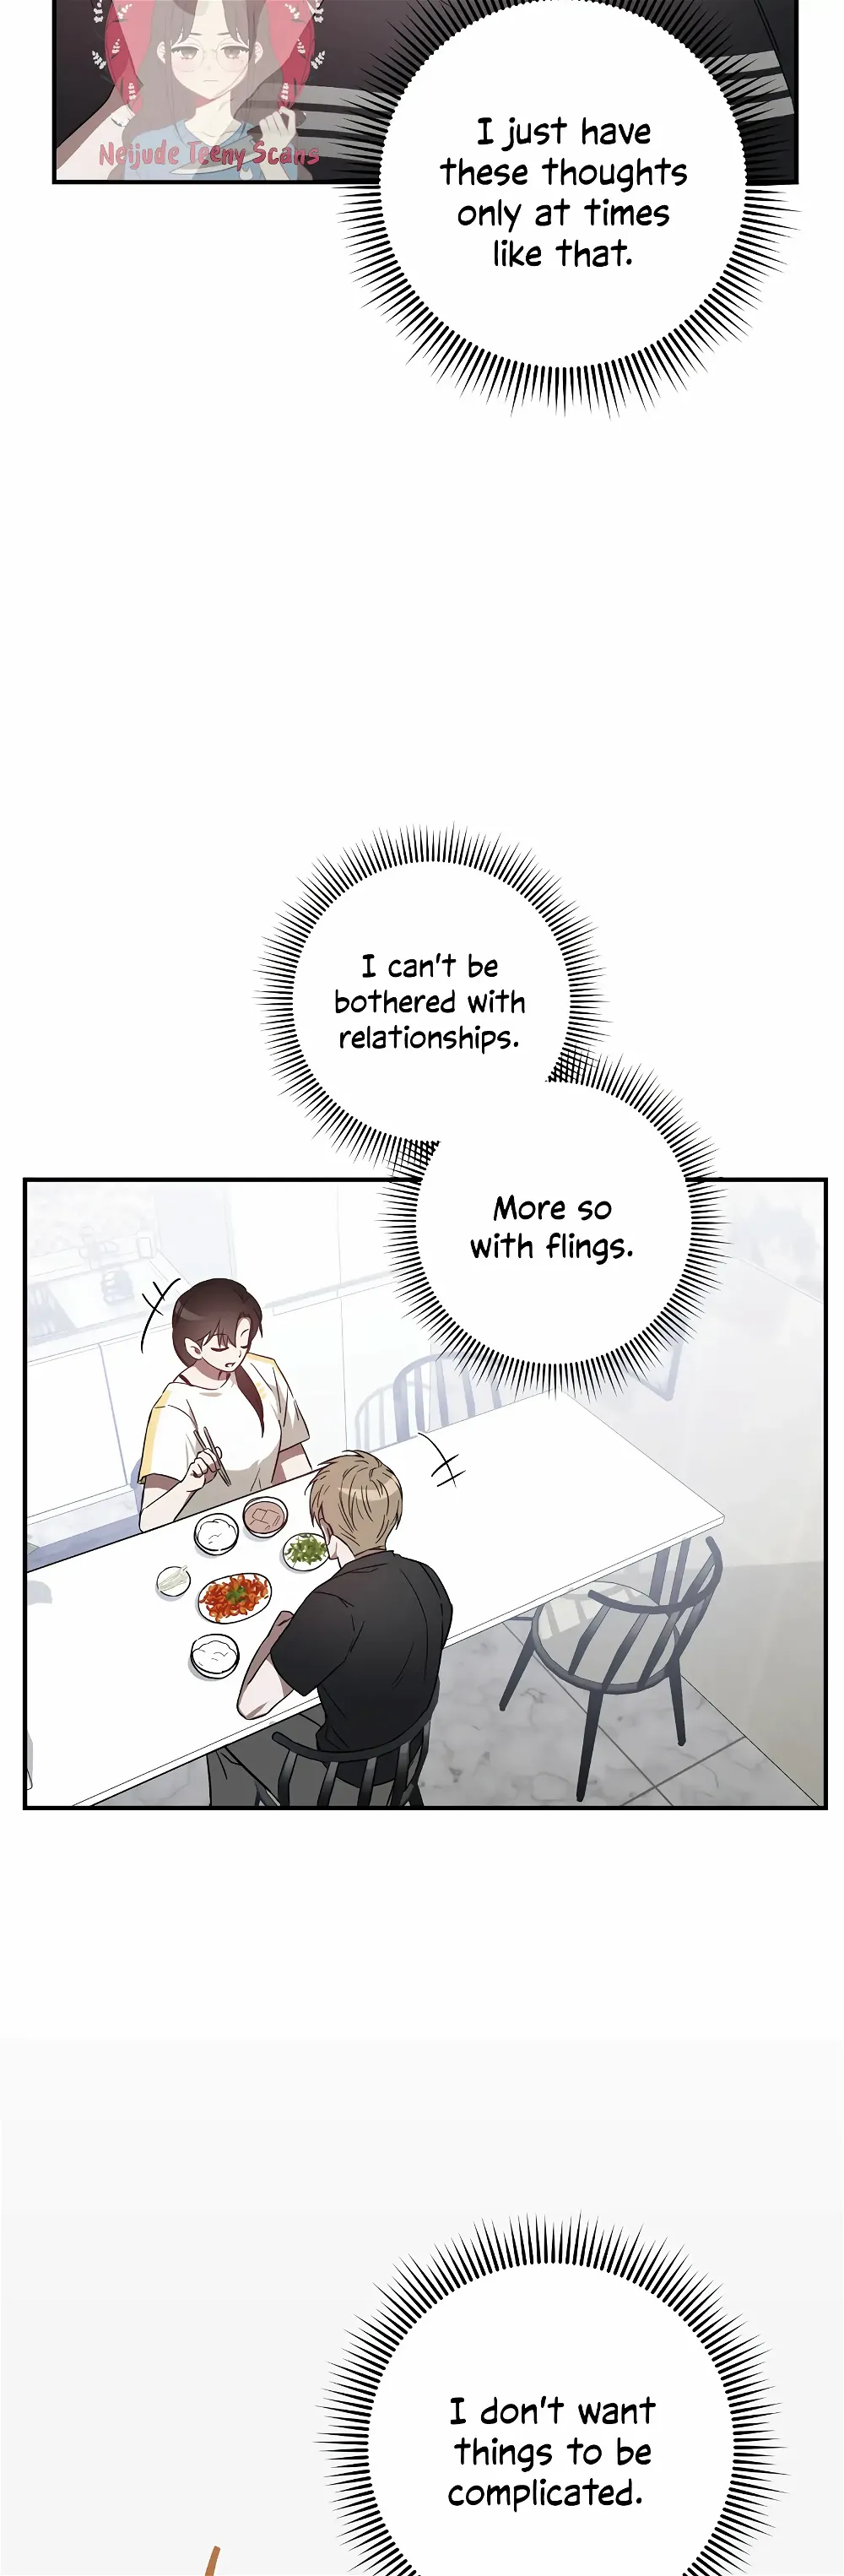 Mijeong’s Relationships chapter 9 - Page 40